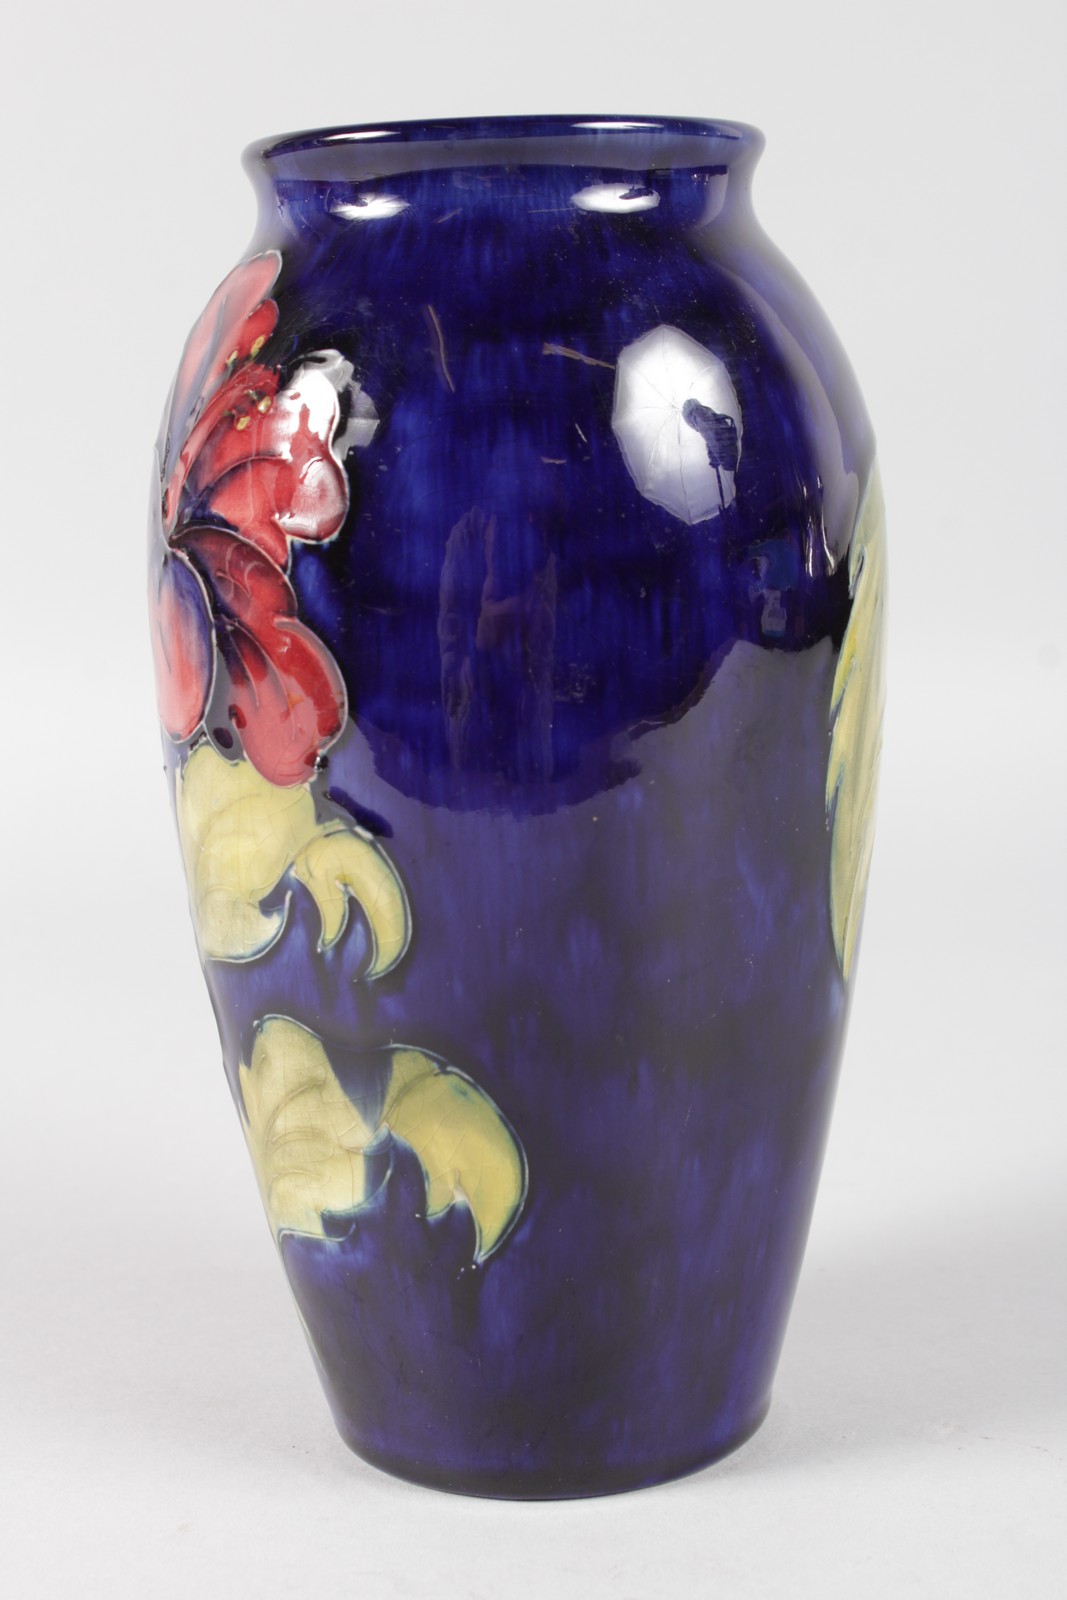 A MOORCROFT HIBISCUS PATTERNED VASE. Impressed MOORCROFT with printed label. 7.5ins high. - Image 4 of 6